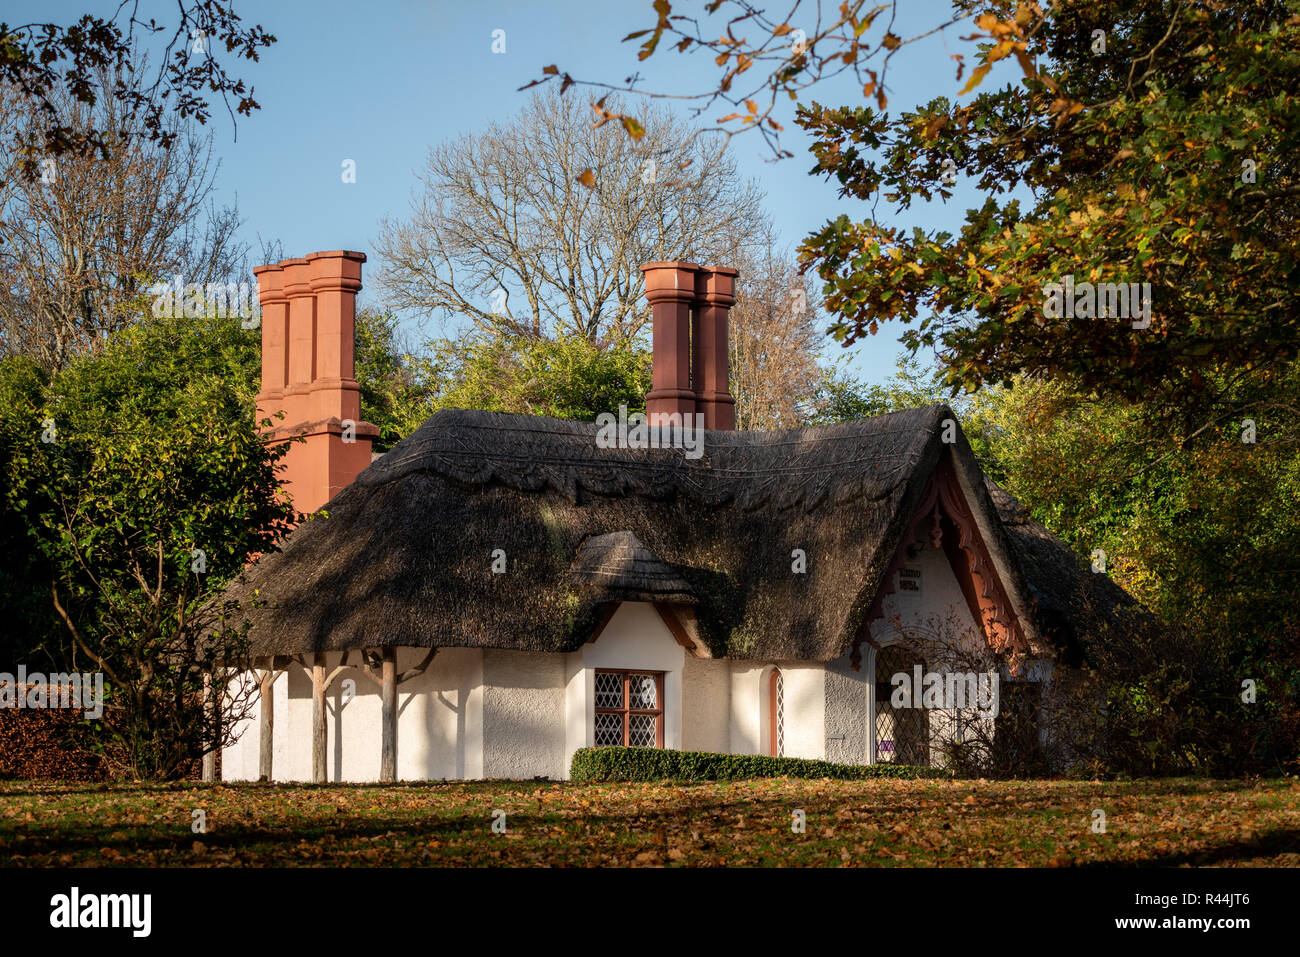 The Deenagh Lodge thatched roof Irish traditional cottage at Demesne, Killarney National Park, County Kerry, Ireland Stock Photo